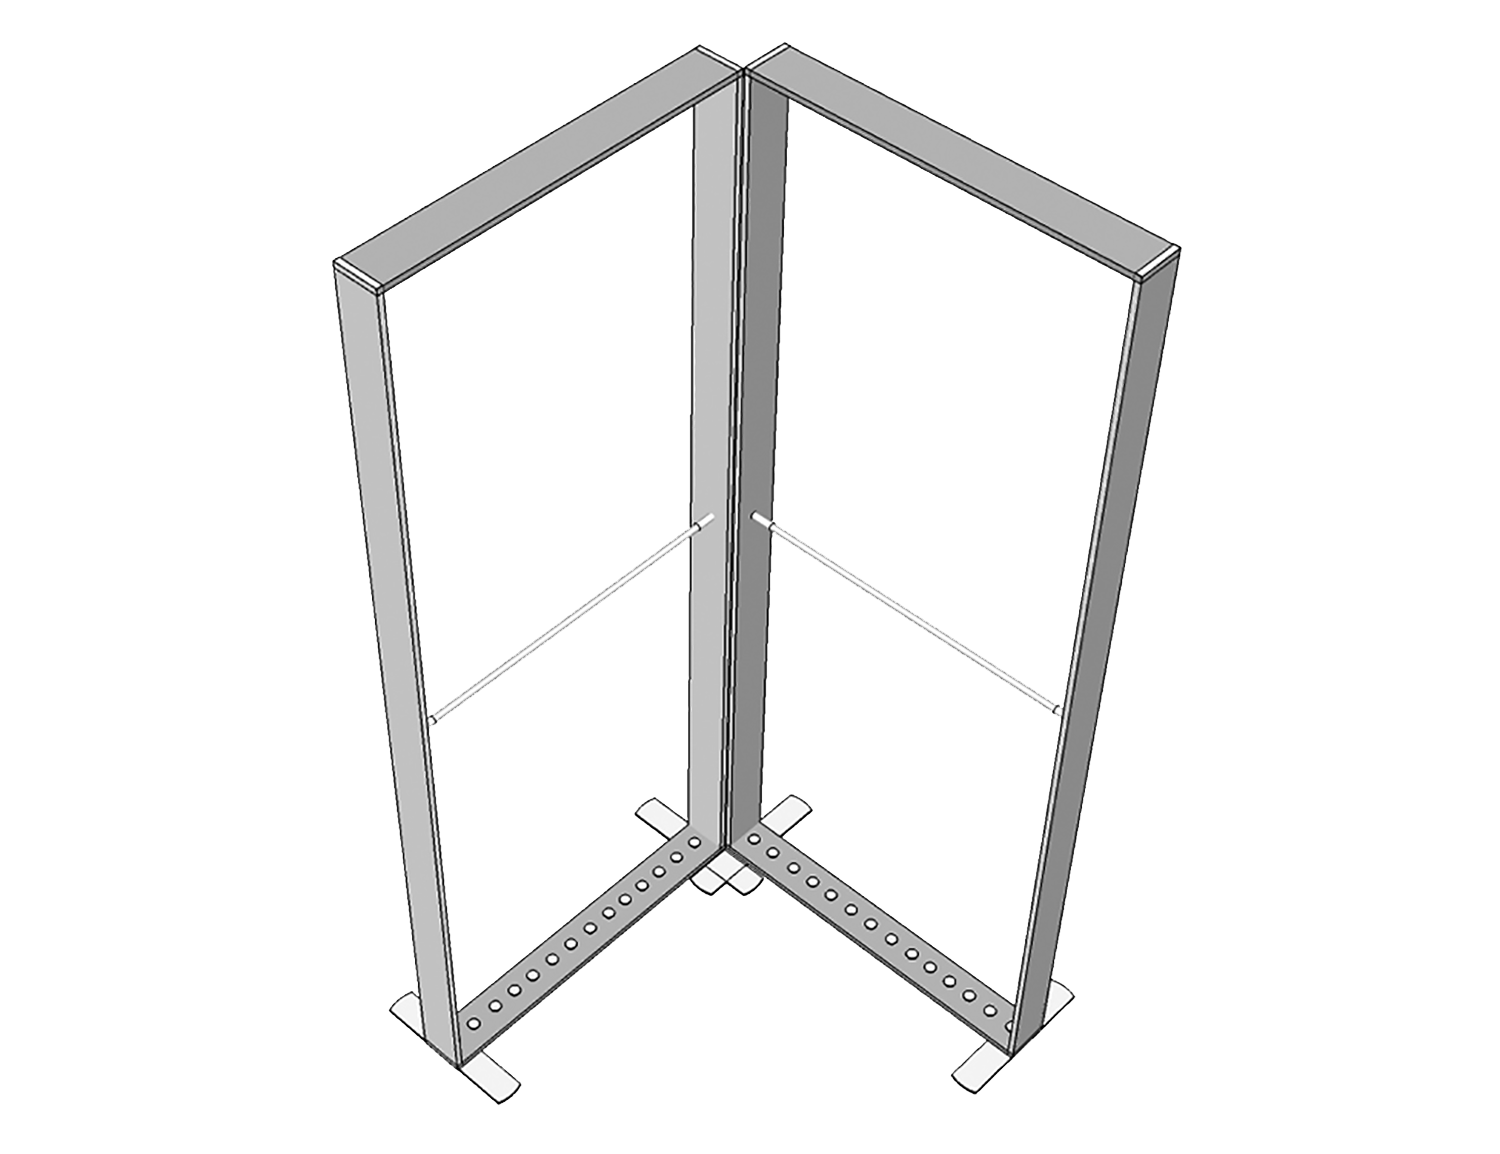 Possibility to assemble modules